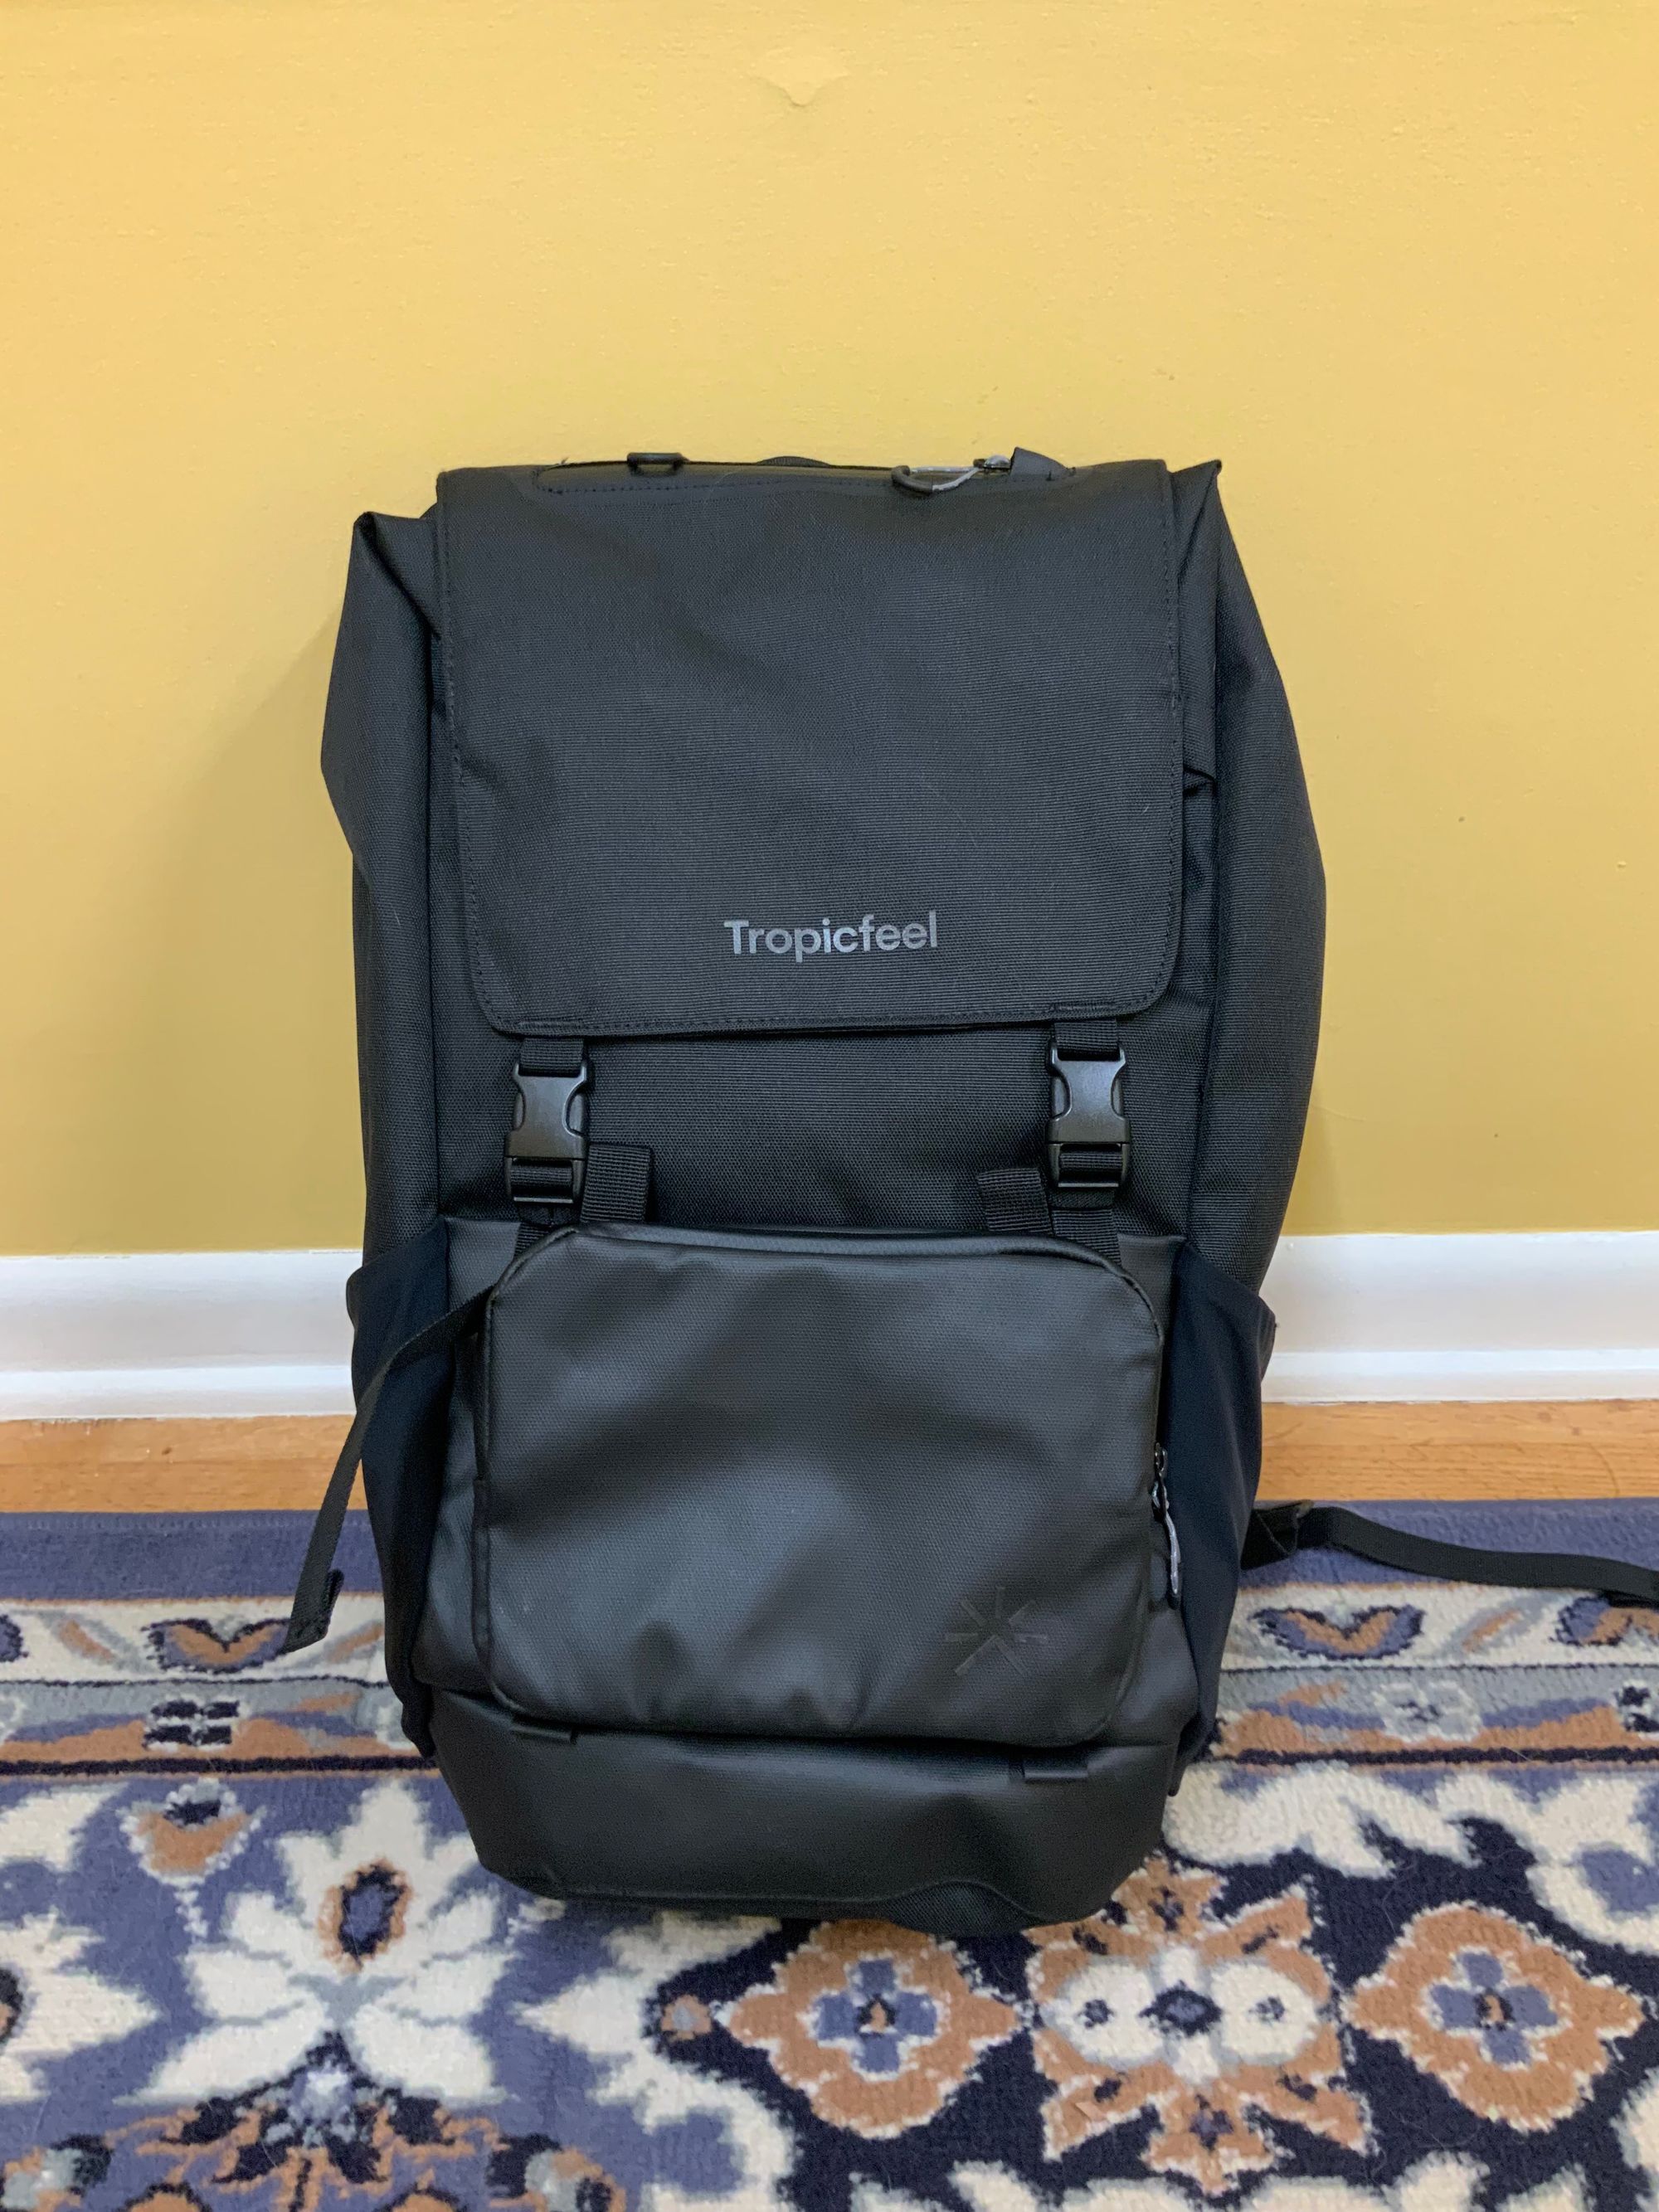 Backpack sitting on the floor. It’s all black with a subtle Tropicfeel logo mark.